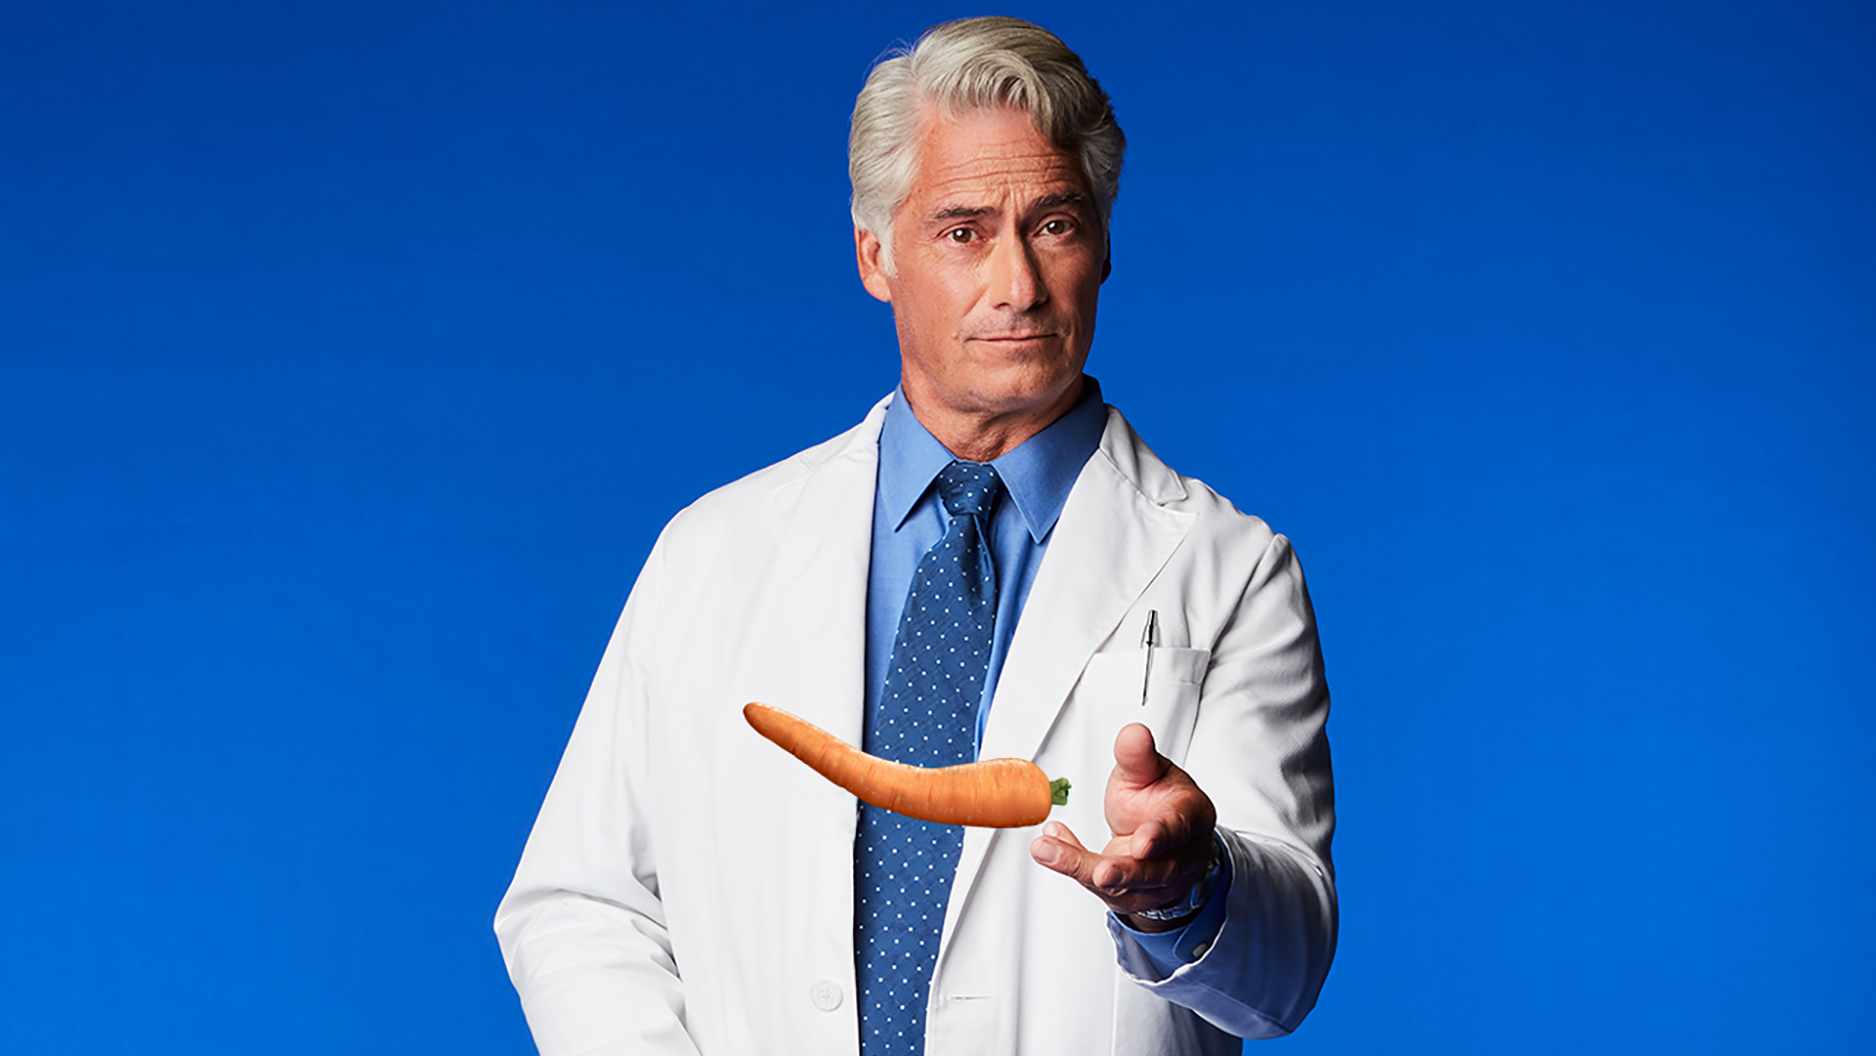 Doctor with a carrot